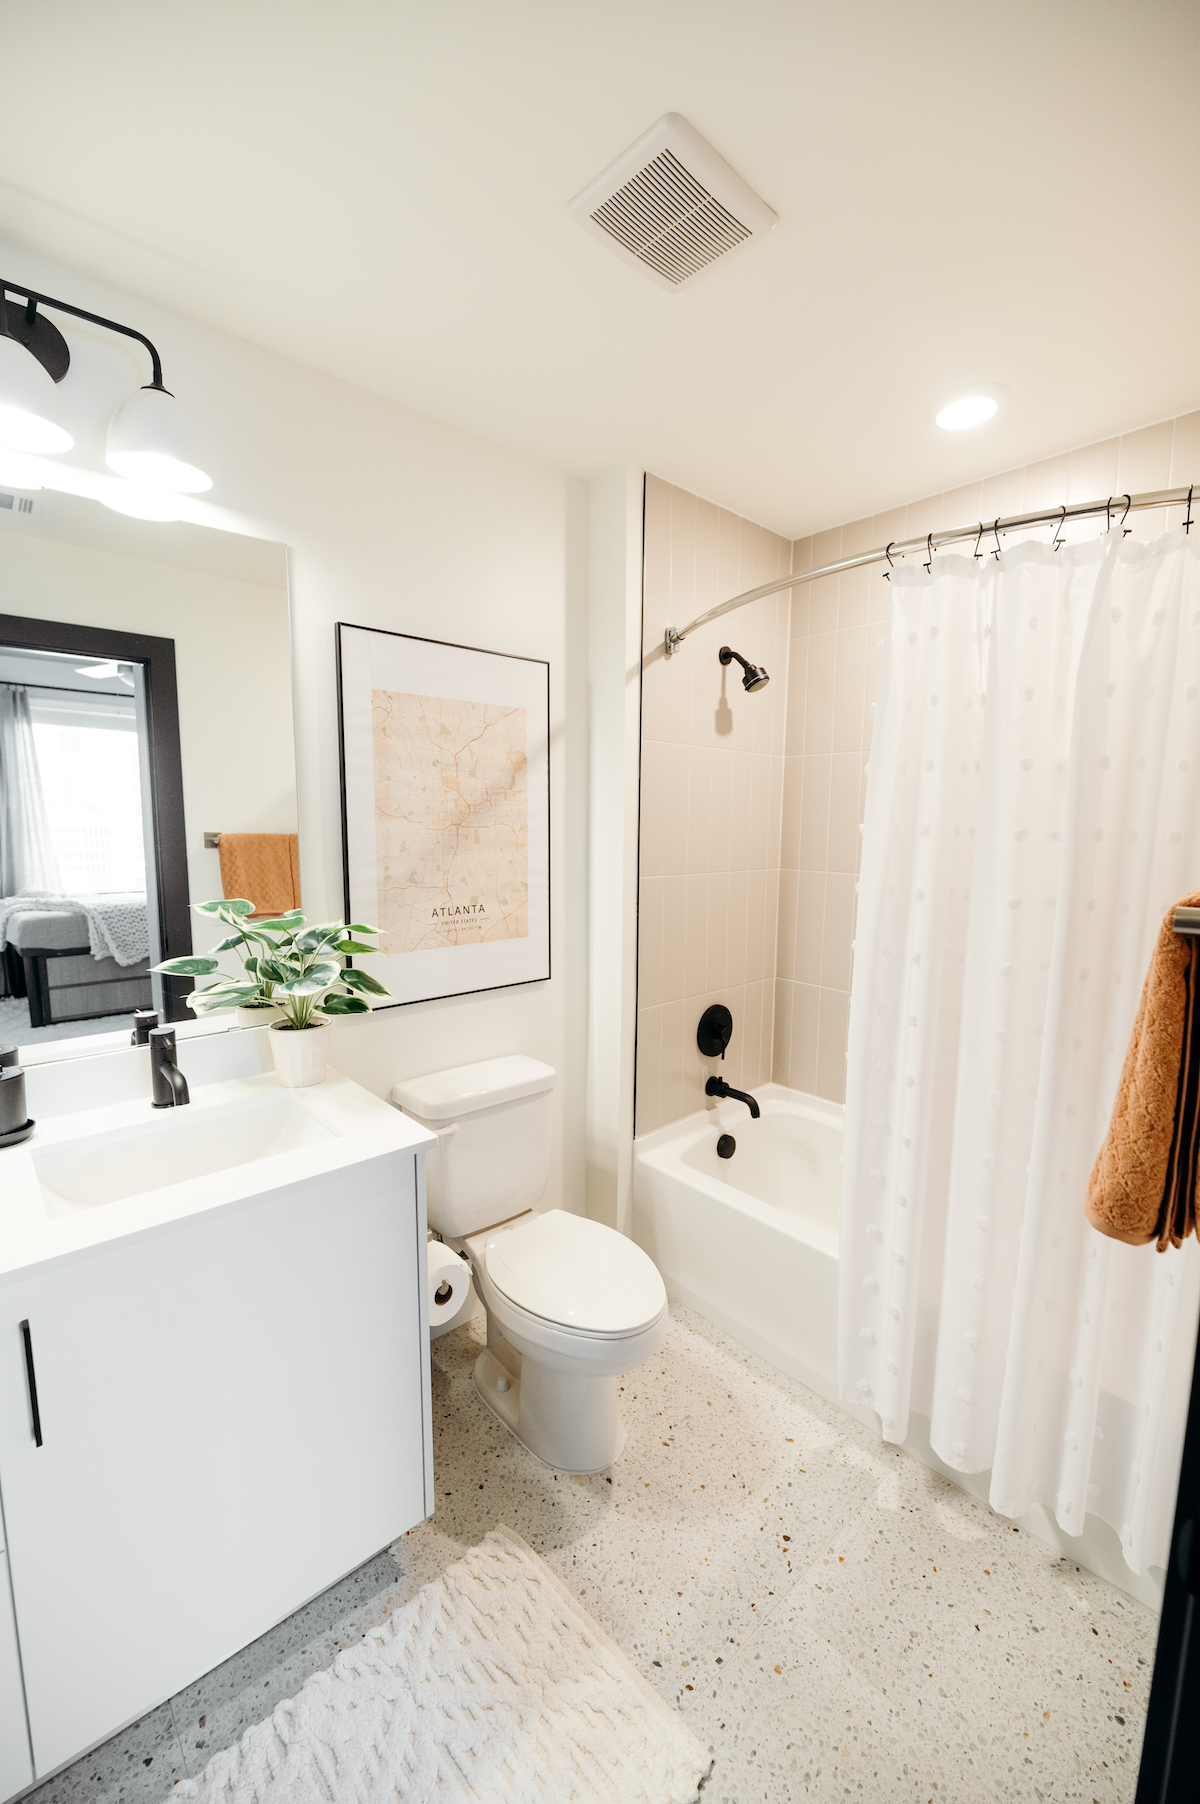 Image of a bathroom at Whistler, a gsu off campus housing option 